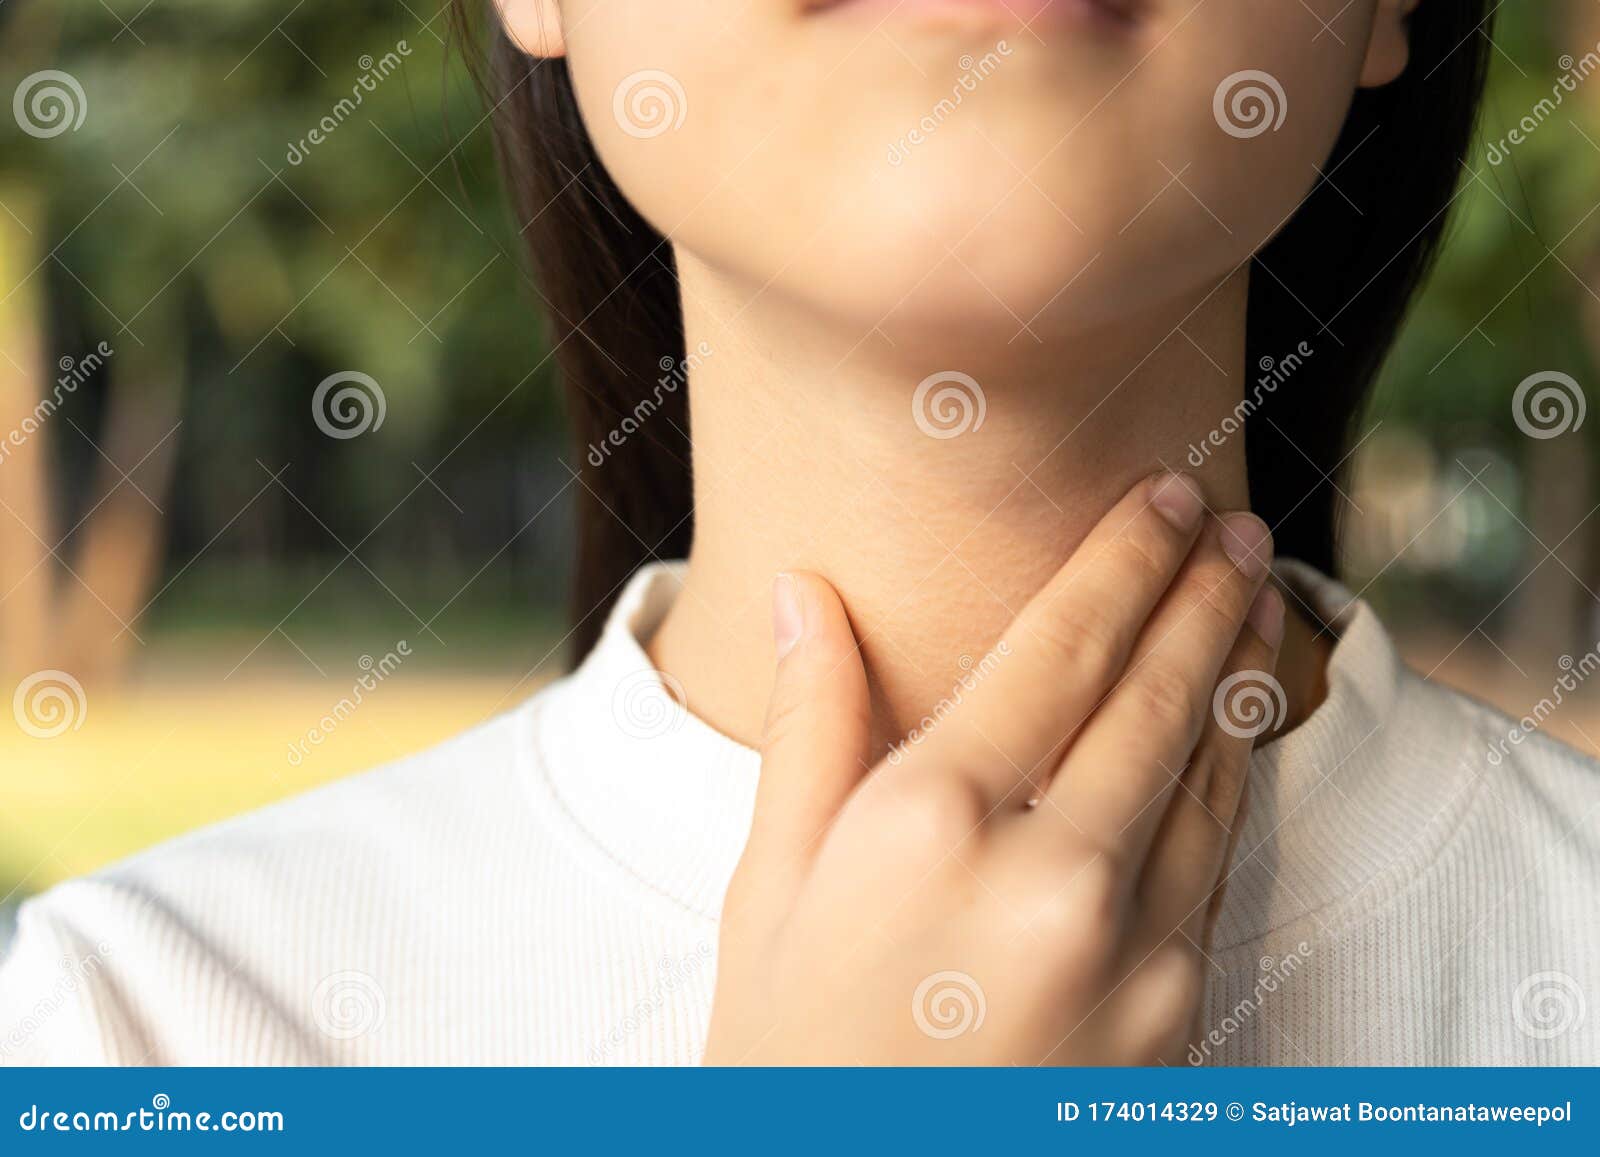 closeup of hands of asian female people holding her inflamed throat or tonsillitis,child girl touch the neck with her hands,woman